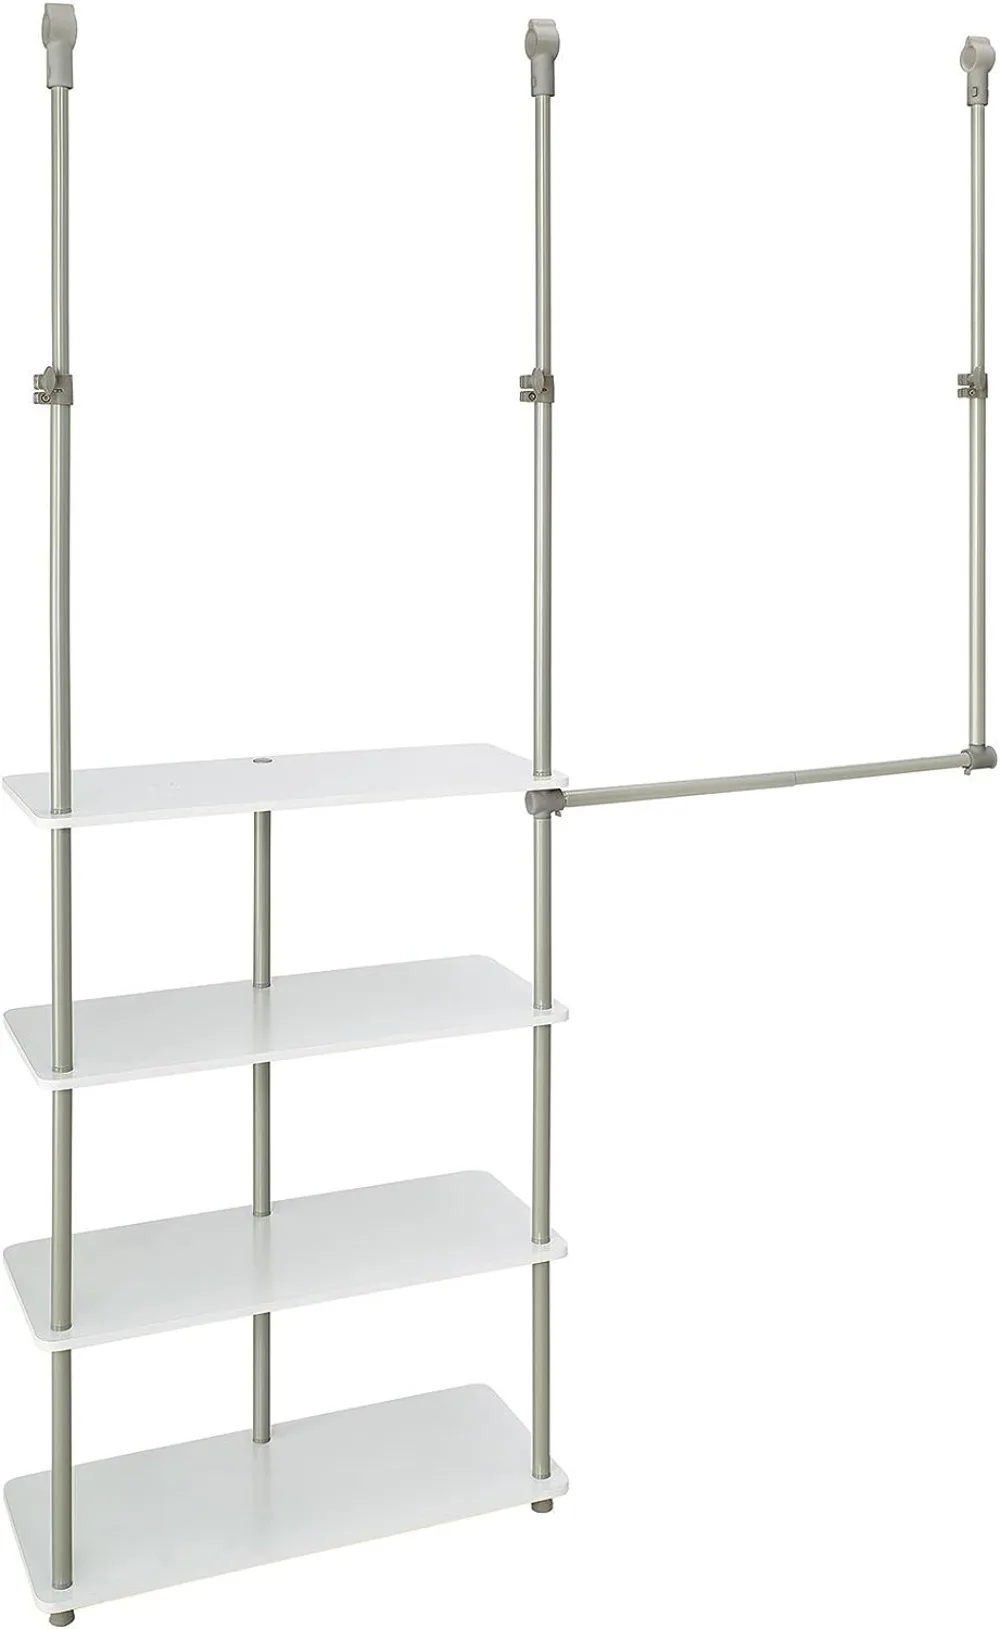 

ClosetMaid 55300 Closet Maximizer with (4) Shelves & Double Hang Rod, Tool Free Add On Unit, White Finish,11.6 x 53 x 74 inches